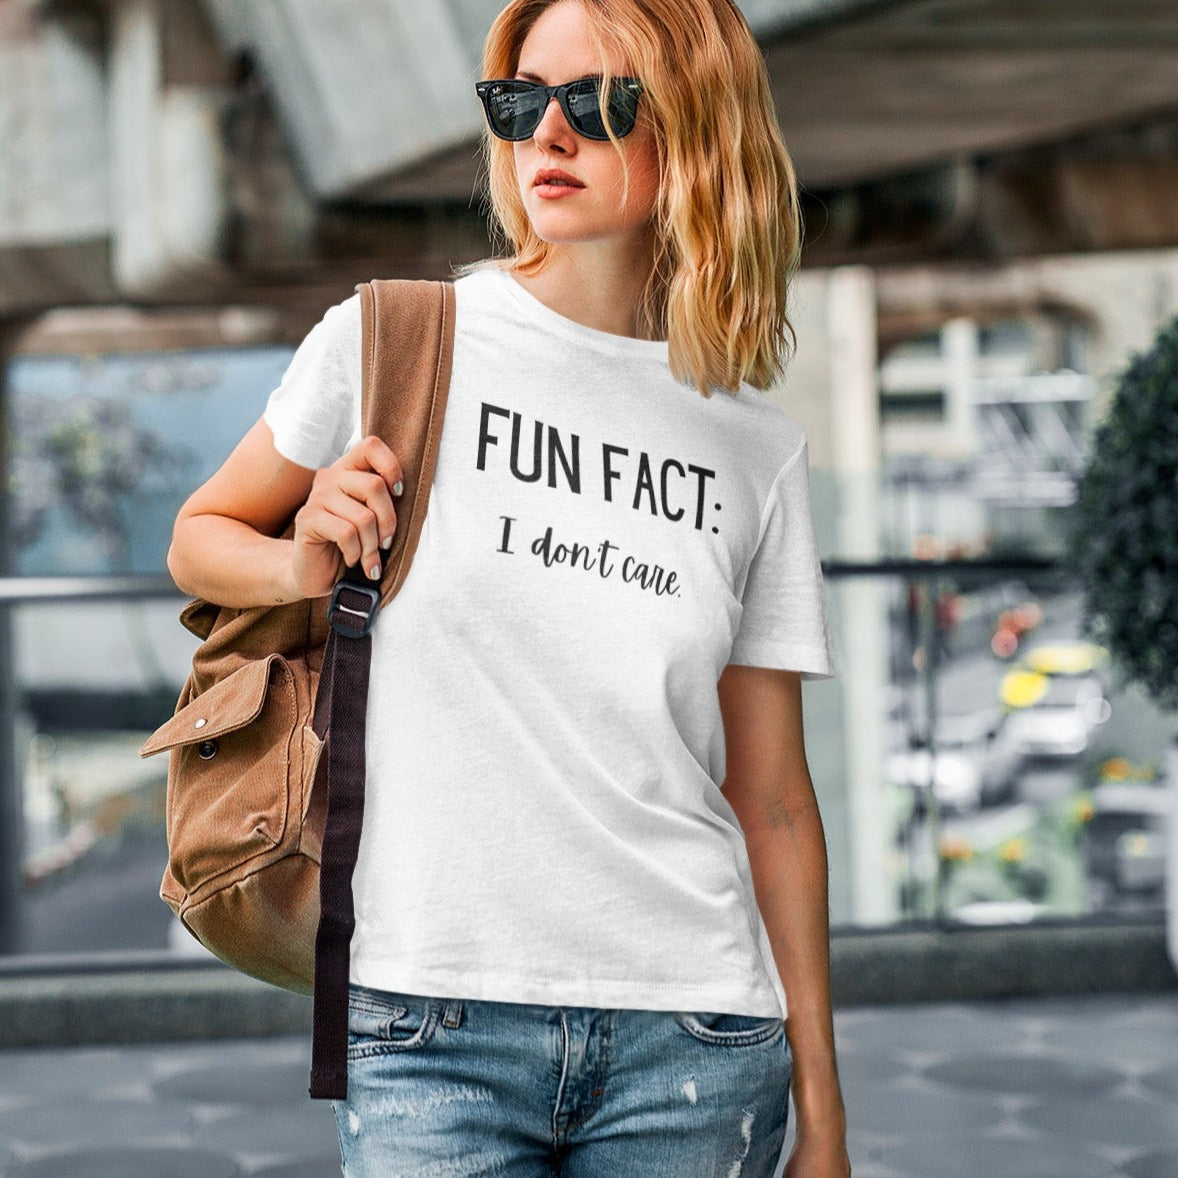 fun-fact-i-dont-care-funny-white-t-shirt-womens-sarcastic-mockup-of-a-woman-wearing-a-round-neck-t-shirt-in-an-urban-setting